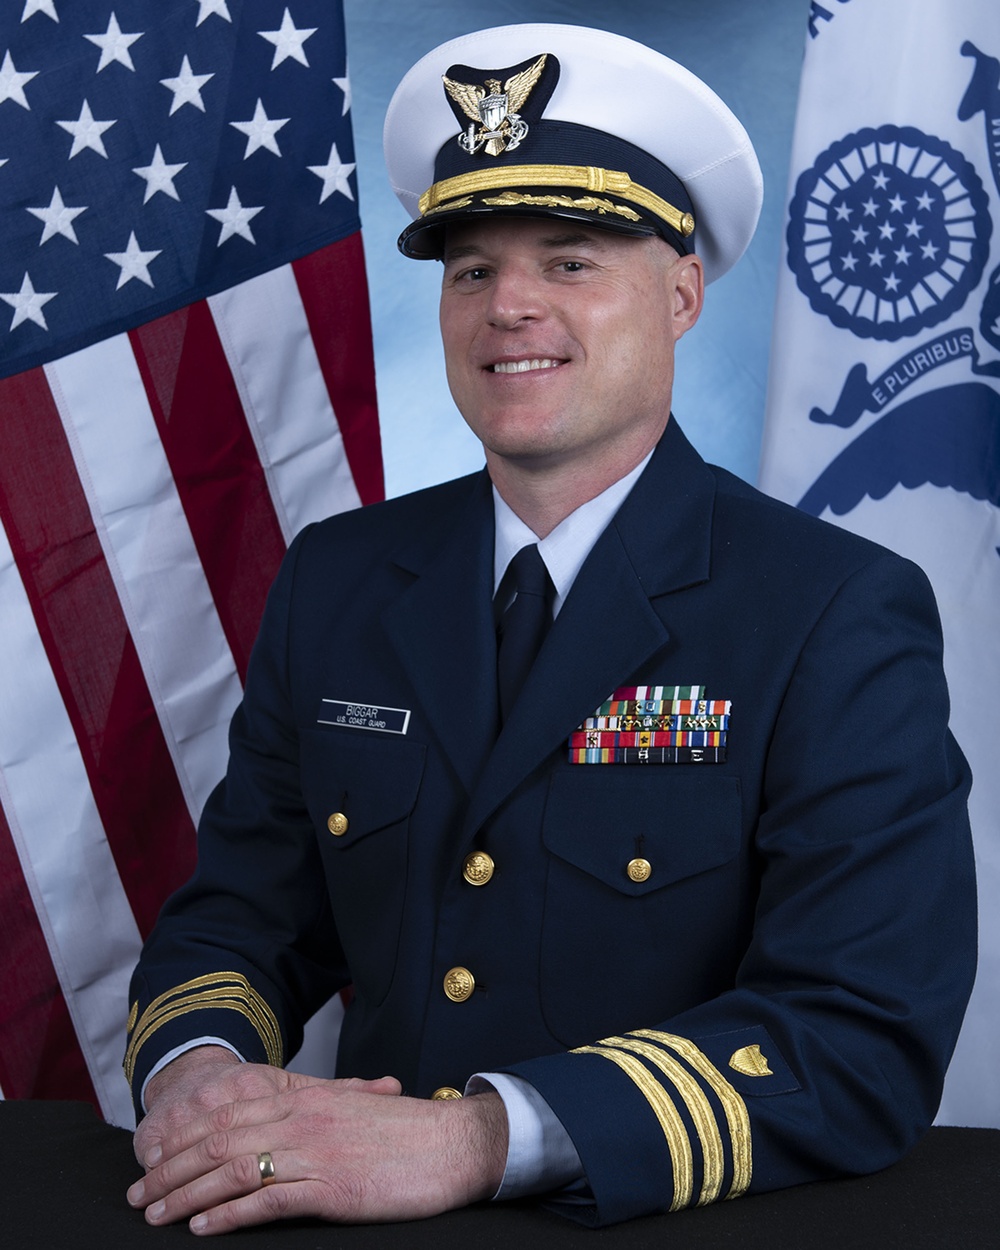 U.S. Coast Guard Cmdr. Jason M. Biggar honorably retired during ceremony at U.S. Coast Guard Training Center Cape May, New Jersey